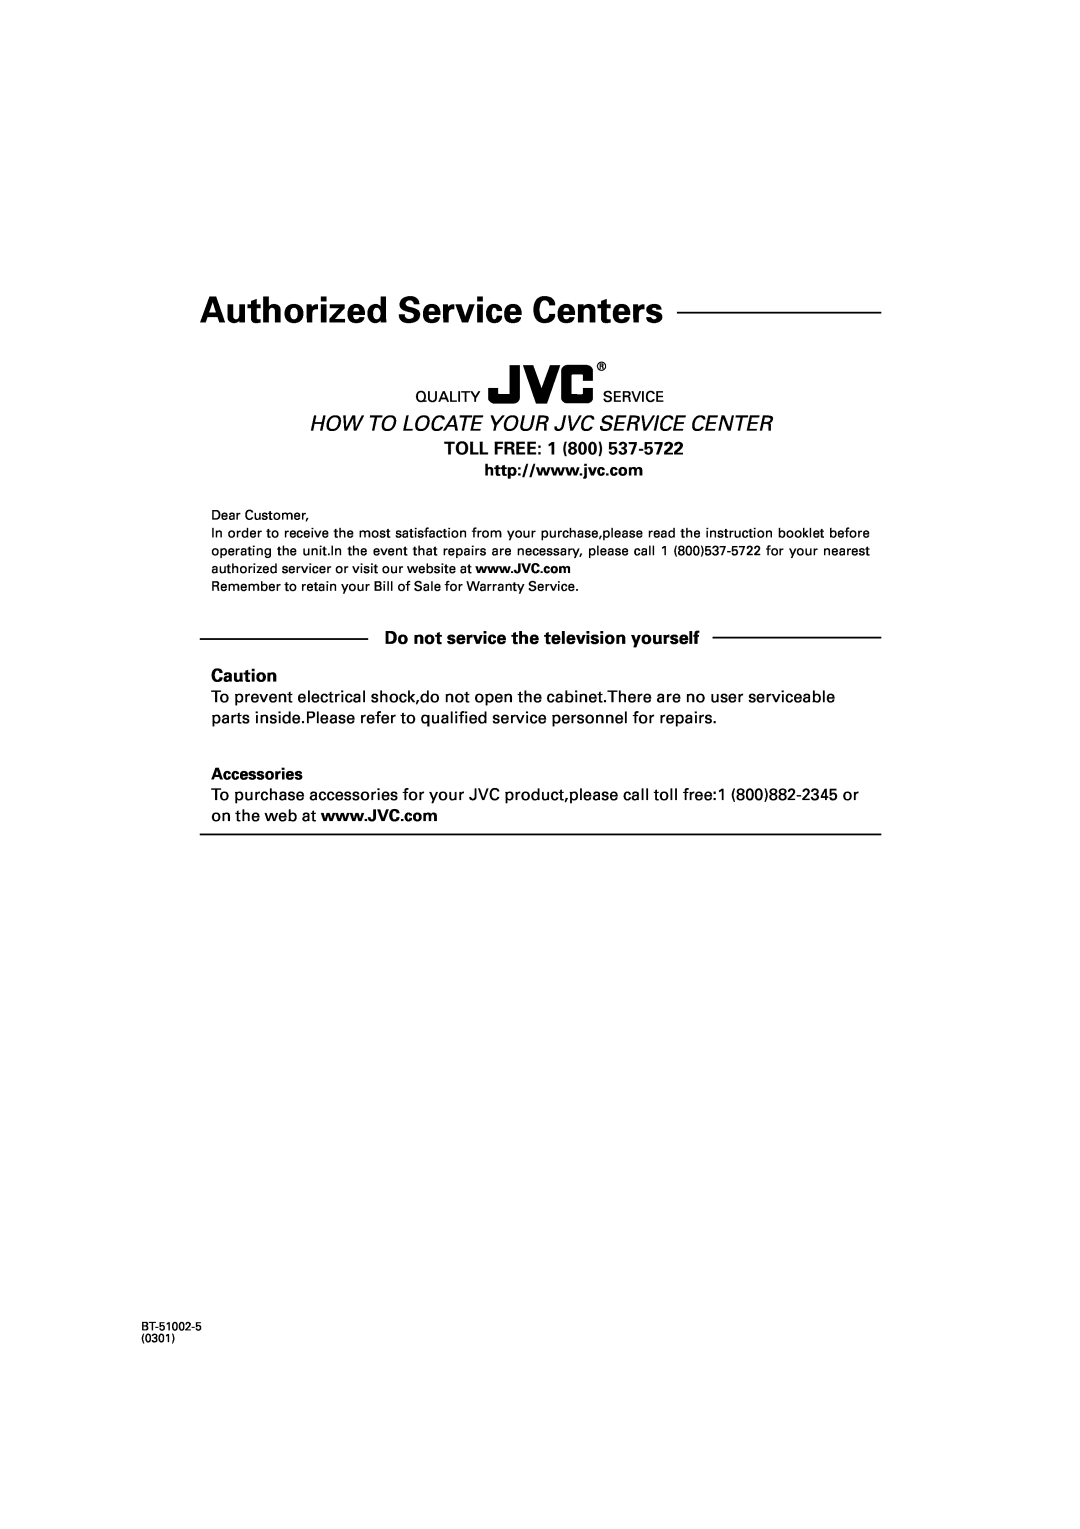 JVC RX-6022VSL manual Toll Free, Do not service the television yourself, Accessories, Authorized Service Centers 